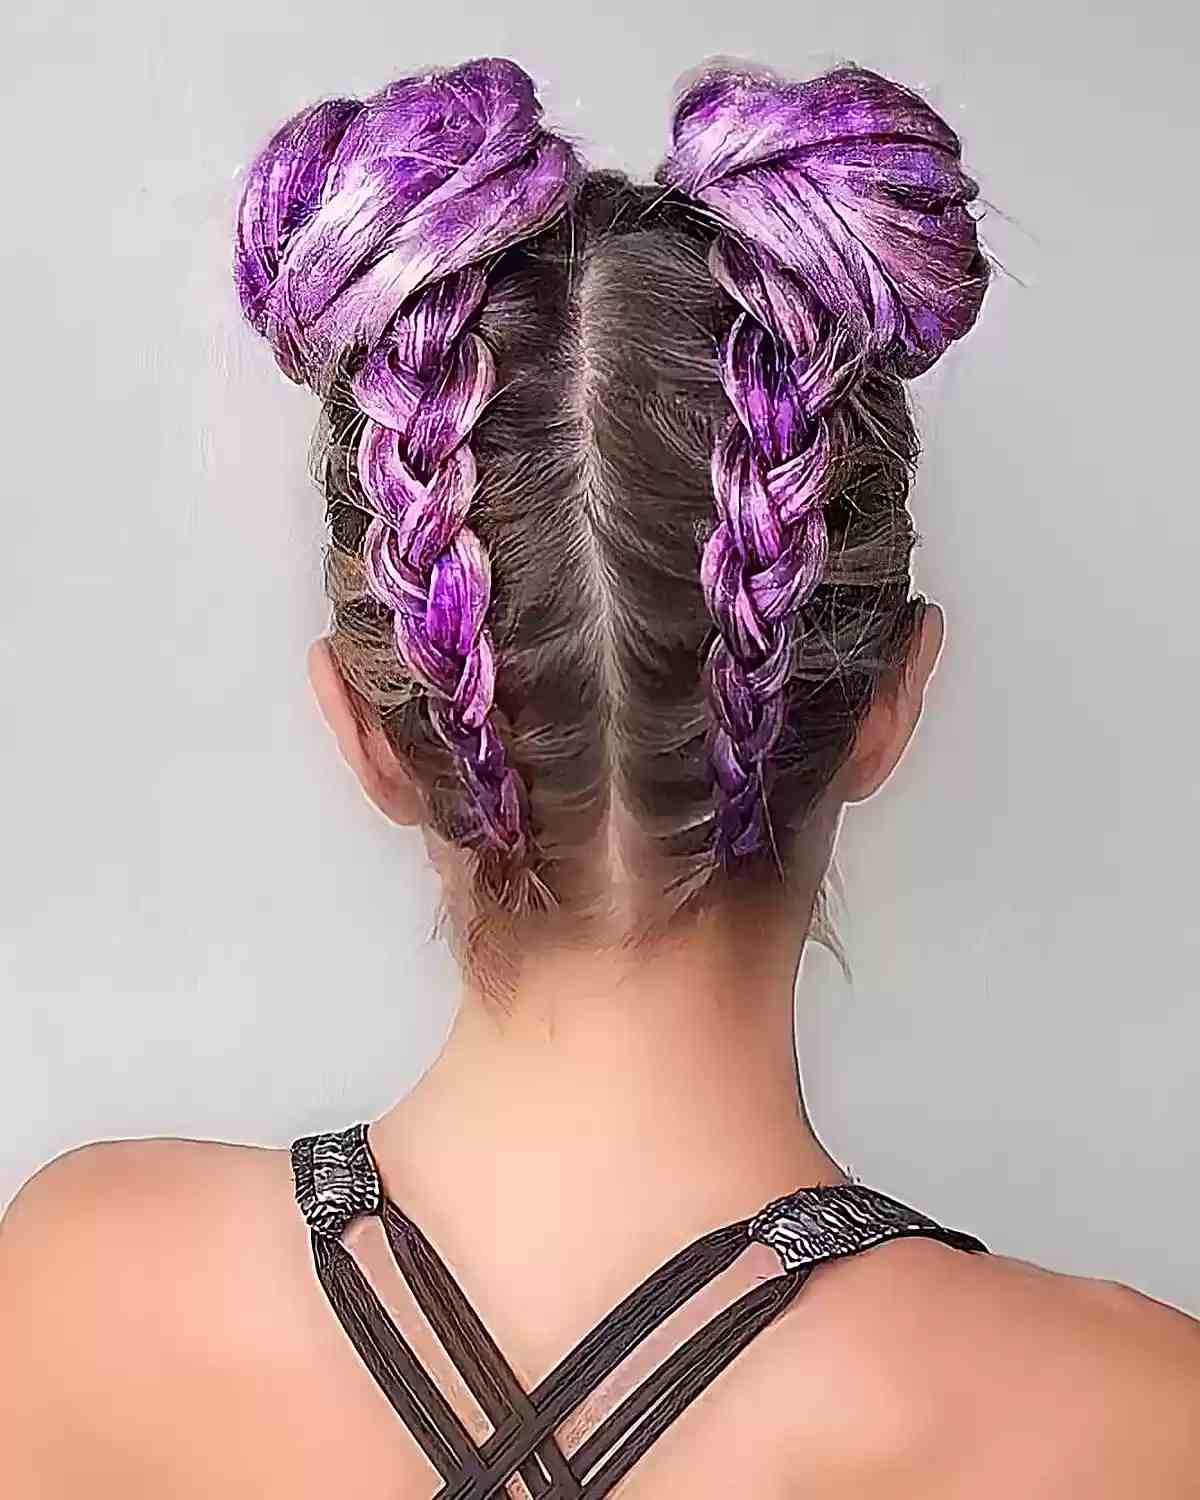 Glittery Braided Space Buns for Rave Festivals